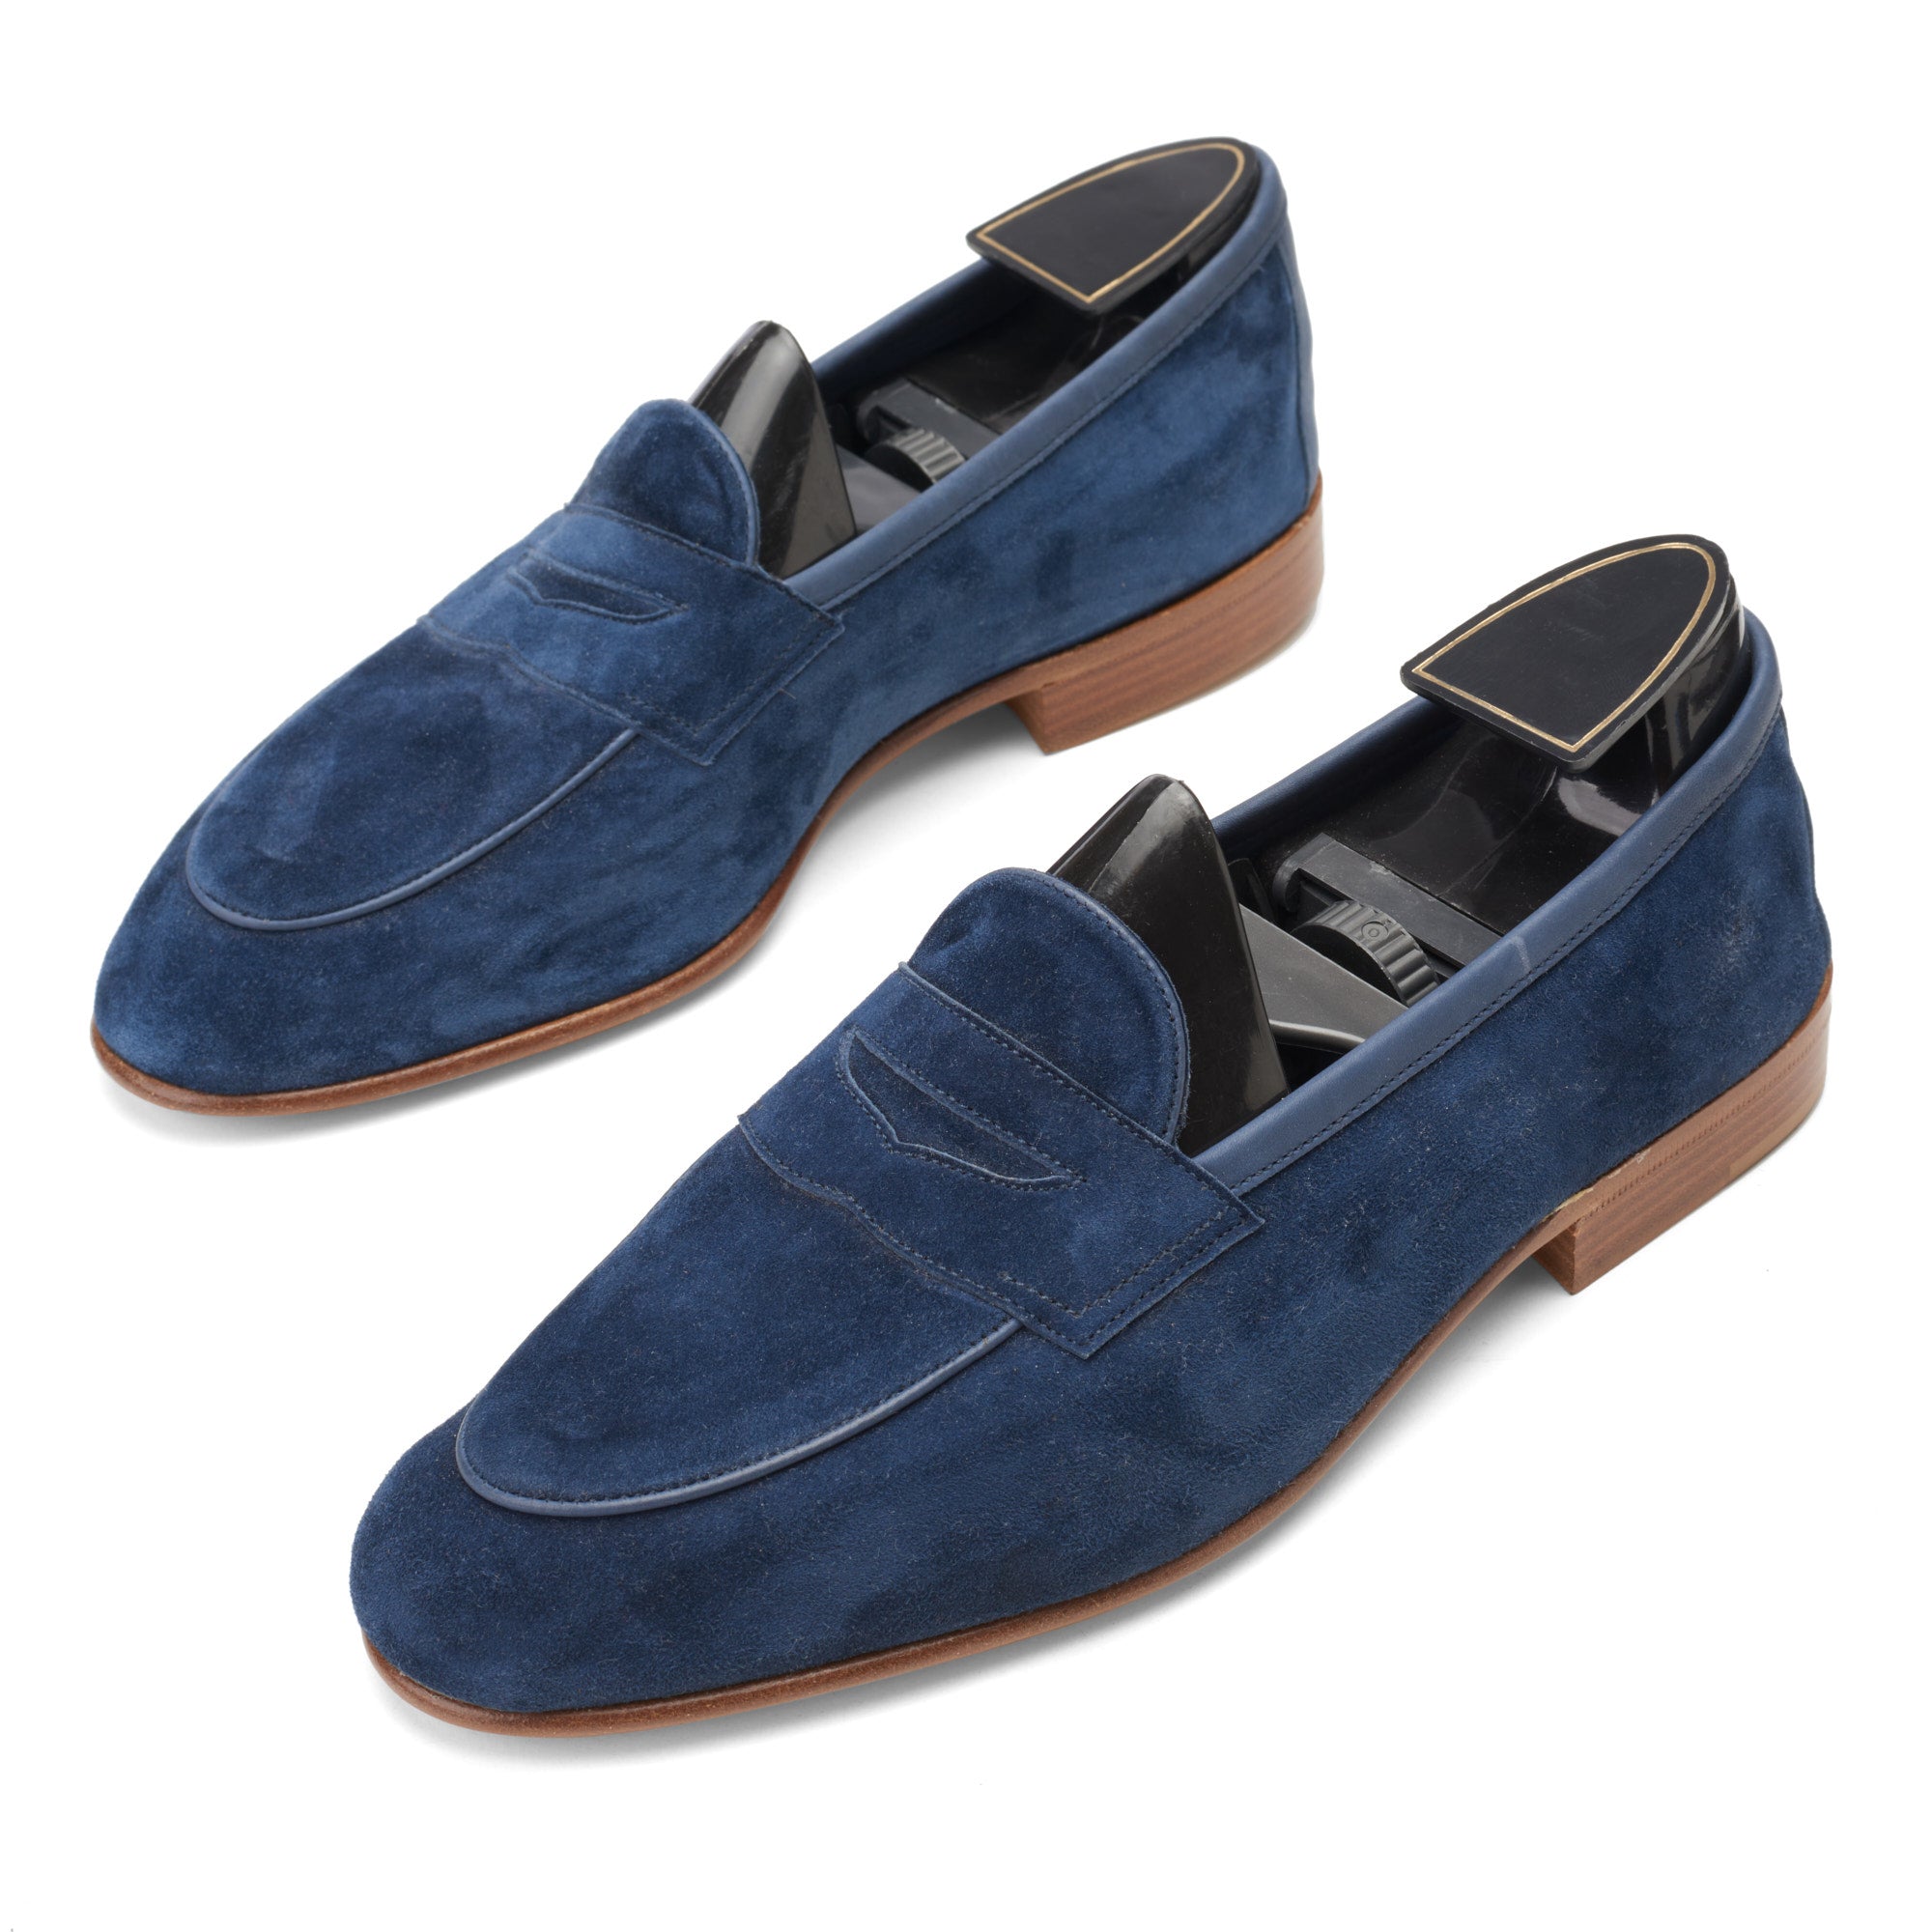 EDWARD GREEN "Polperro" Last 389 Navy Blue Suede Penny Loafers UK 6.5 NEW US 7